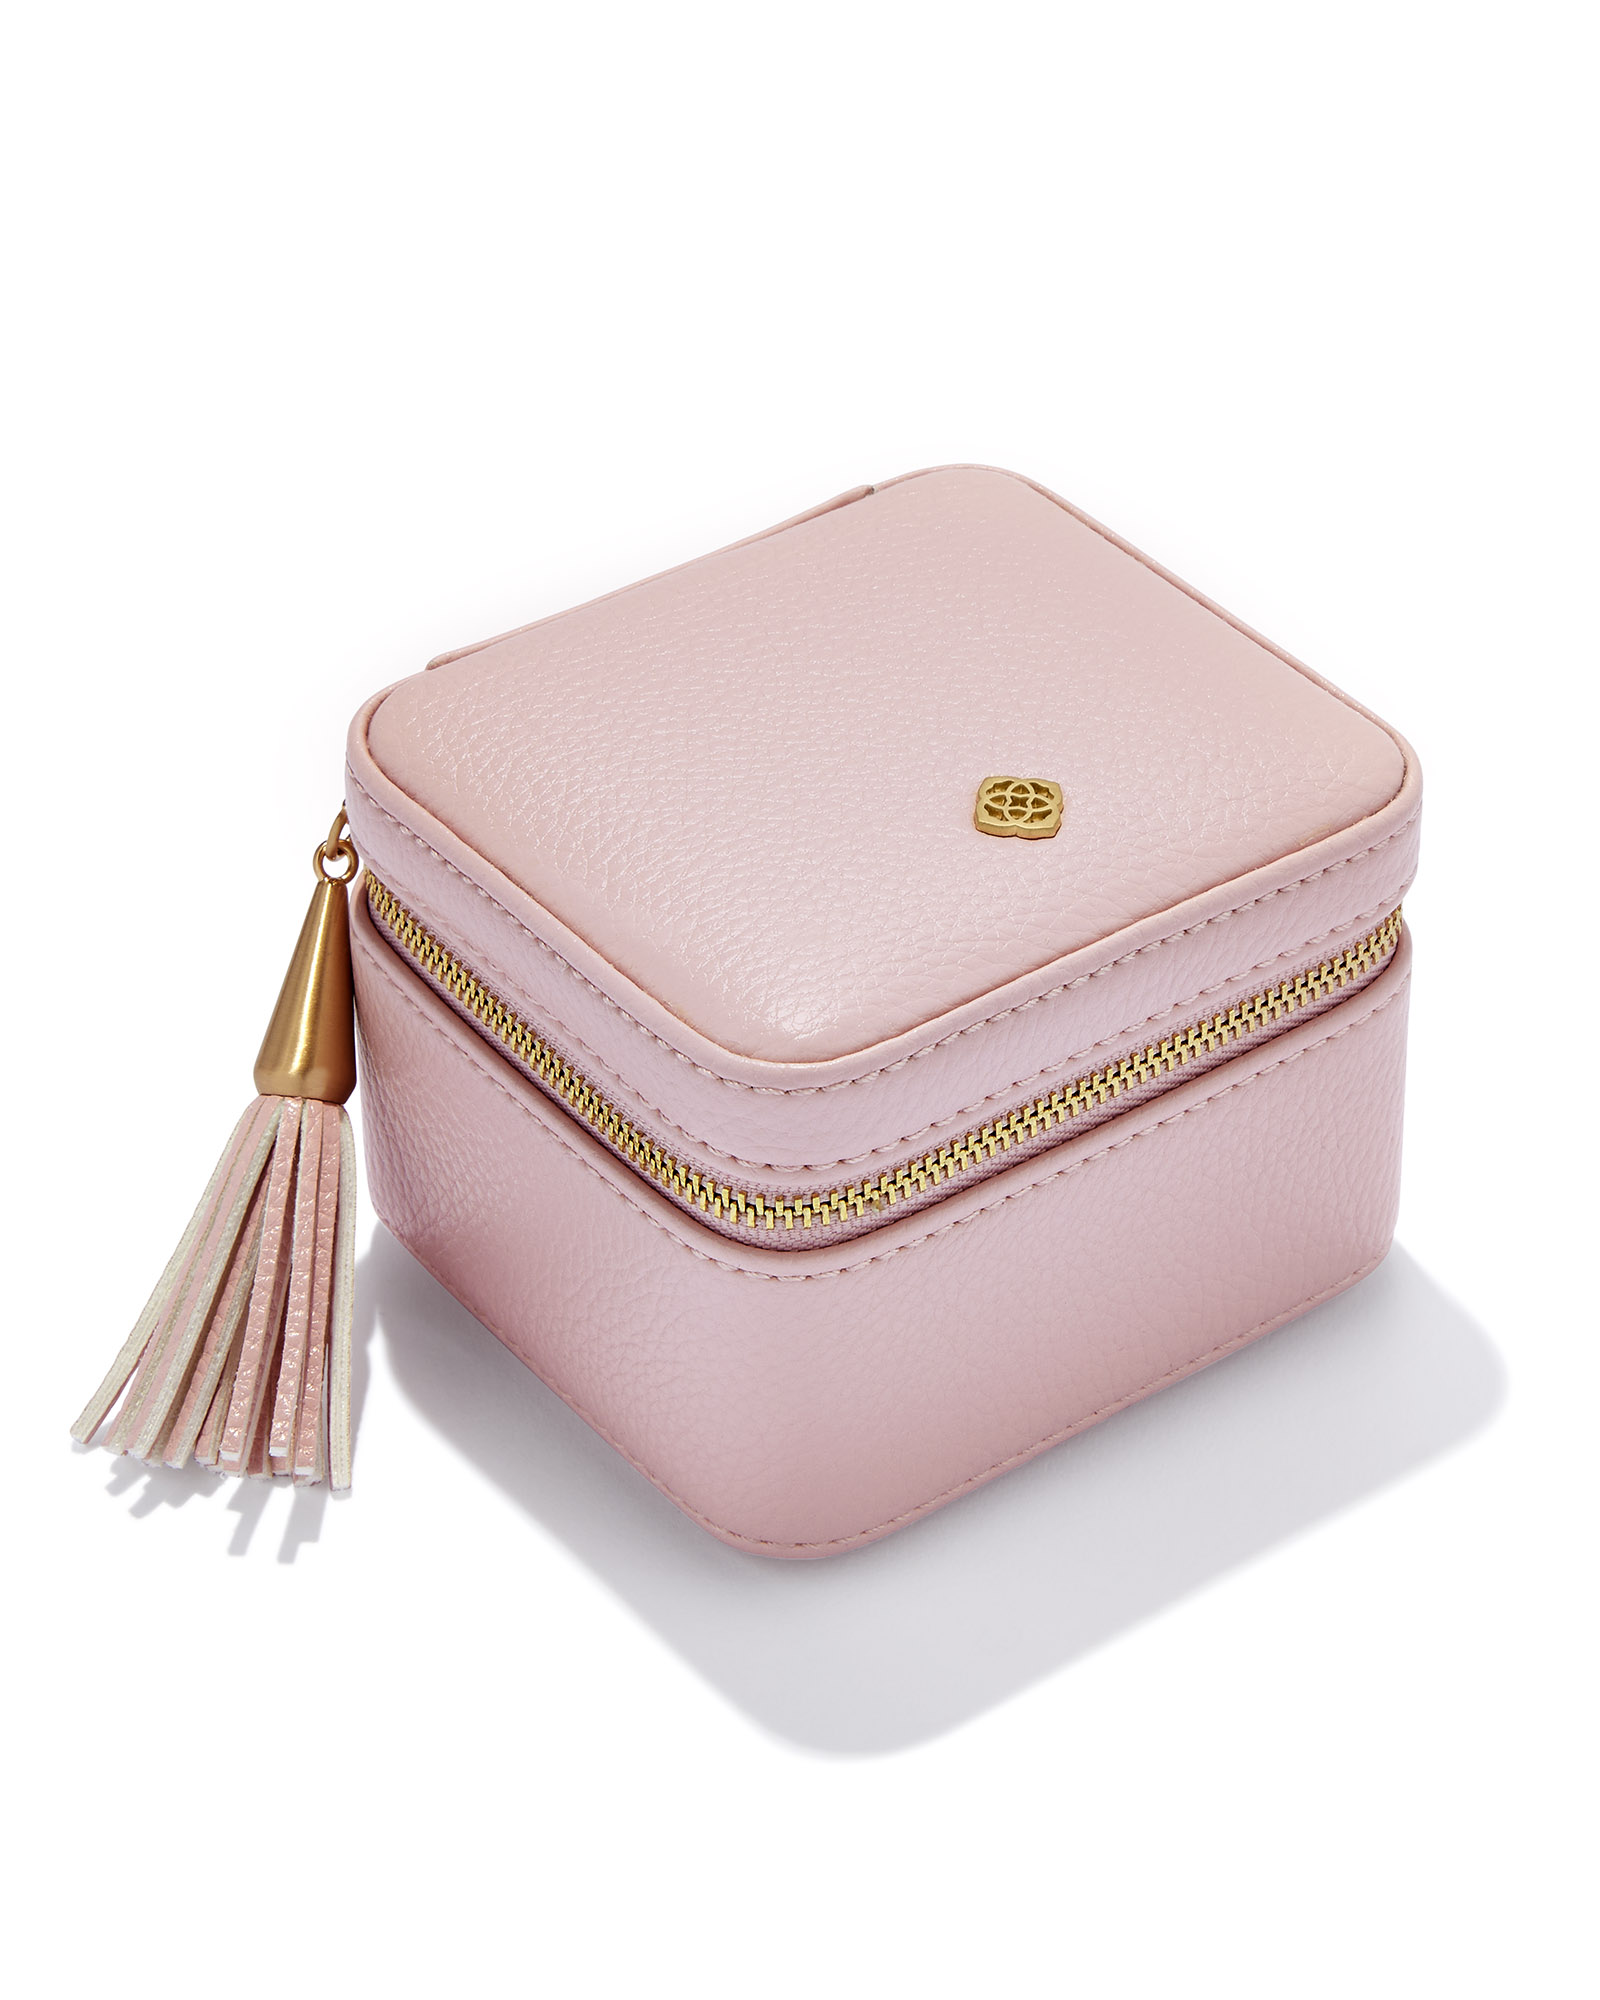 Rose Gold Clutch Purse : Page 43 : Target